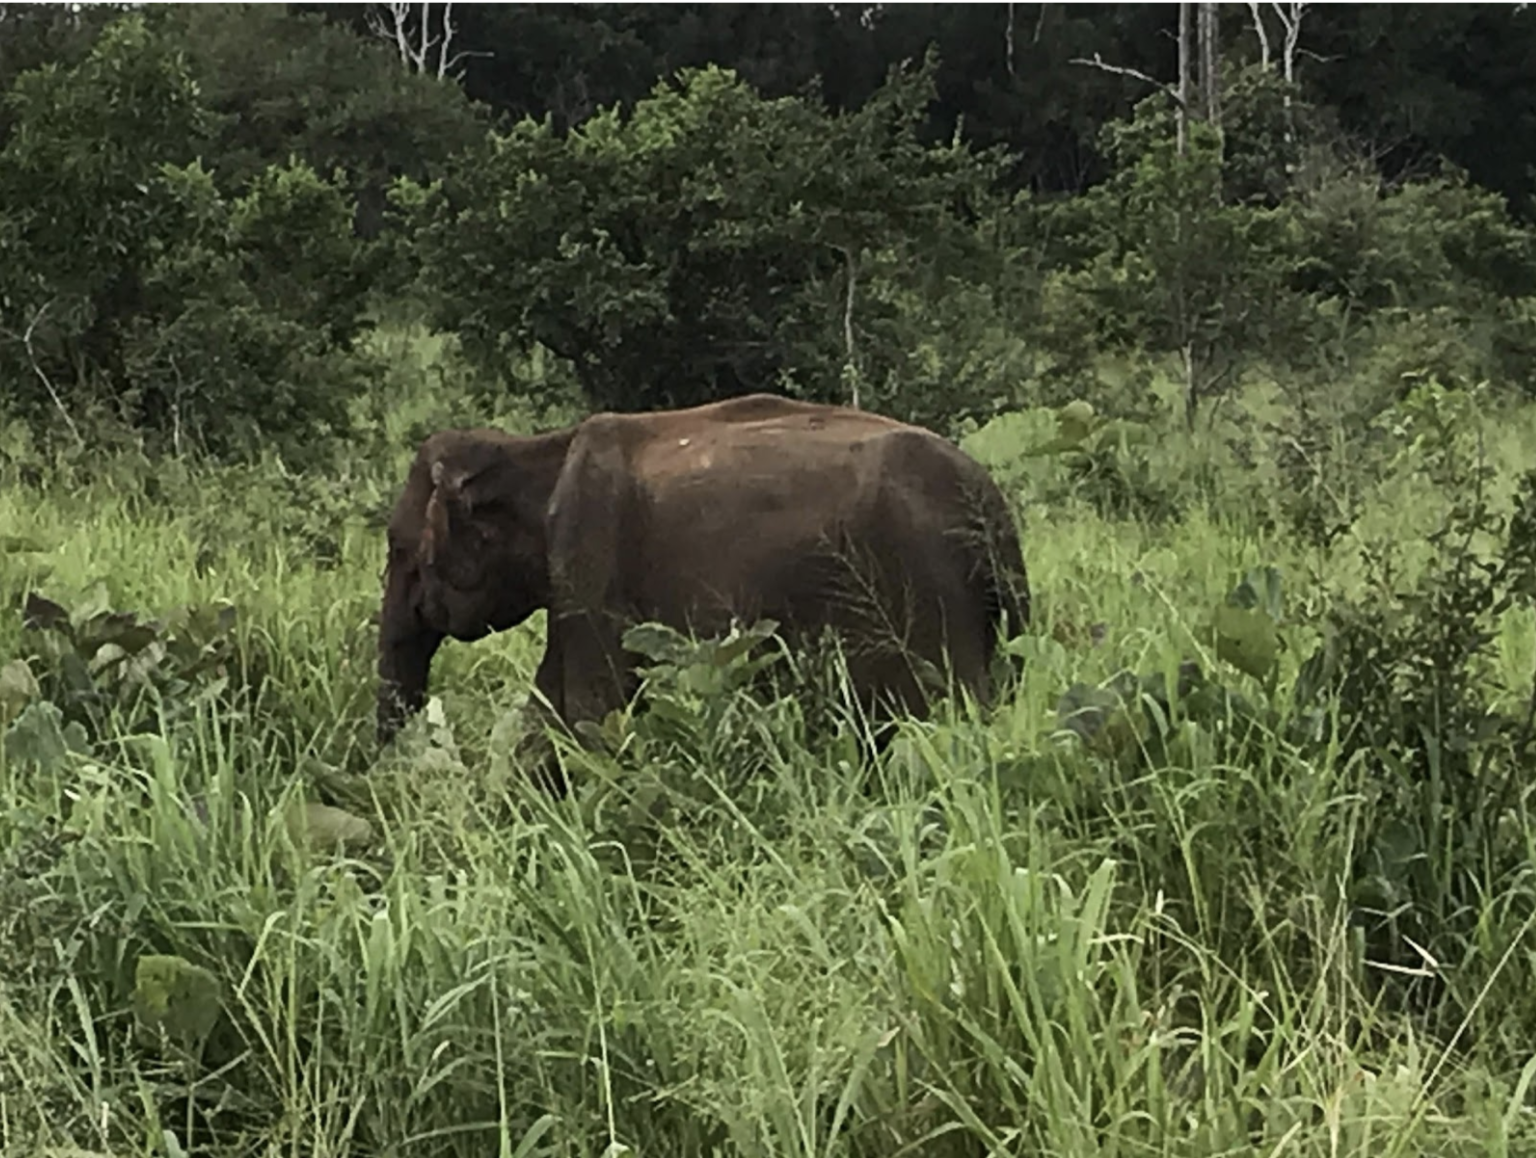 Image of elephant standing in grass